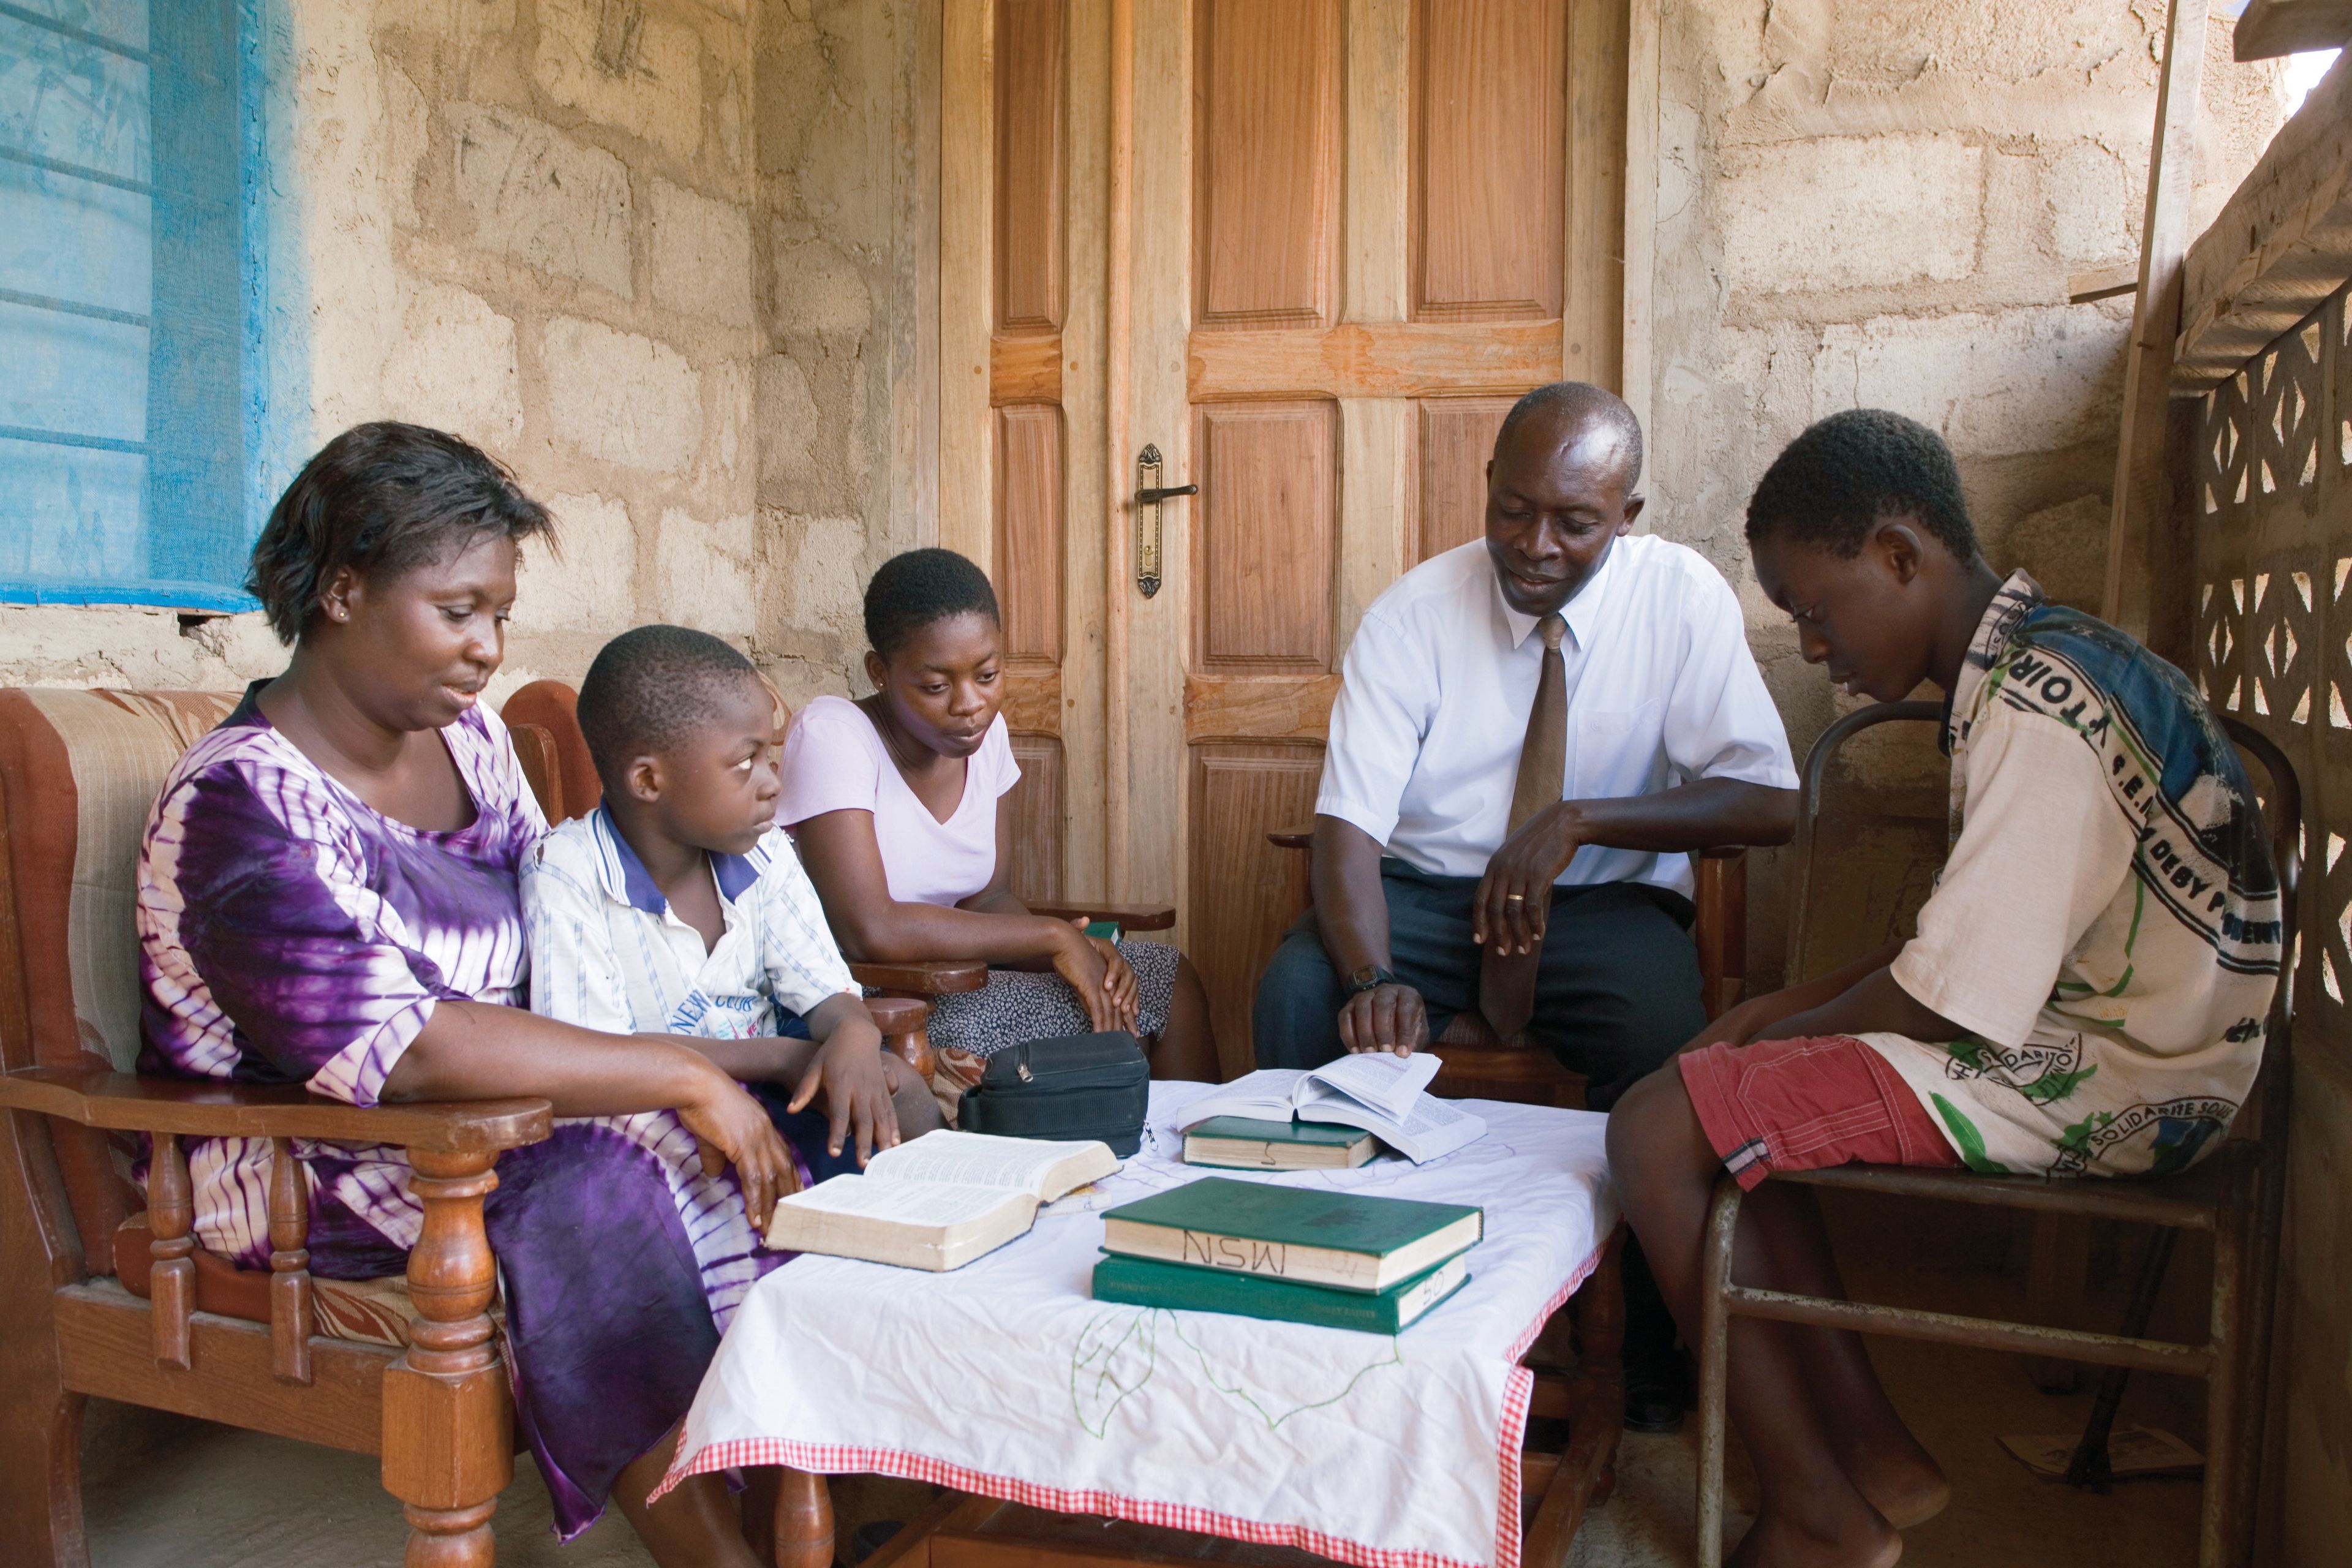 A family in Ghana hold family home evening and read scriptures together.